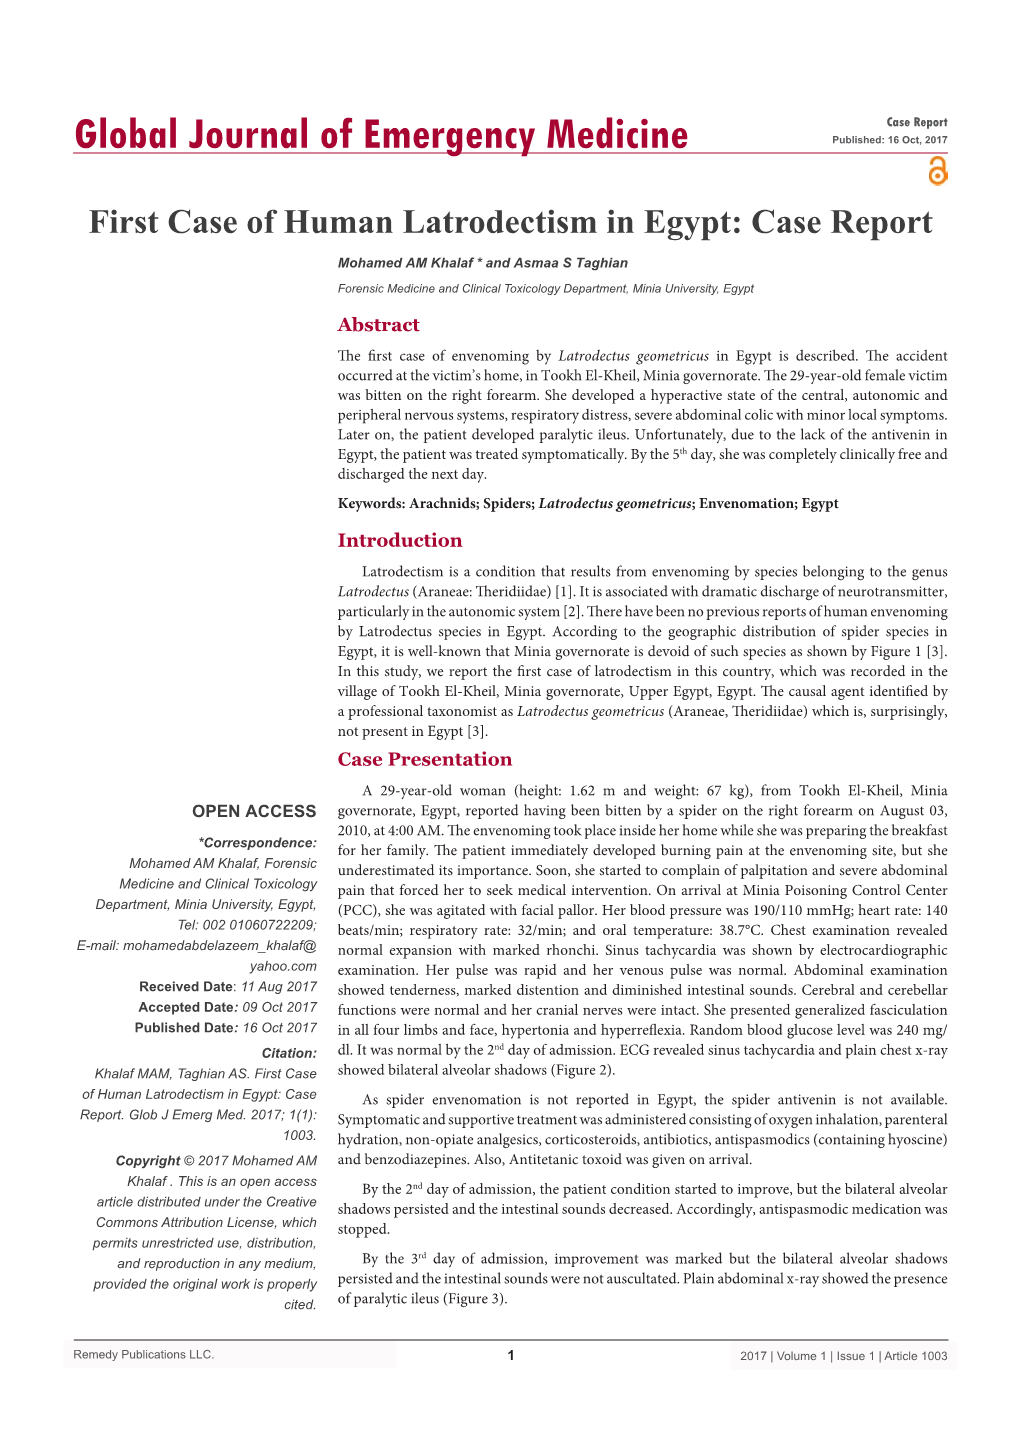 First Case of Human Latrodectism in Egypt: Case Report